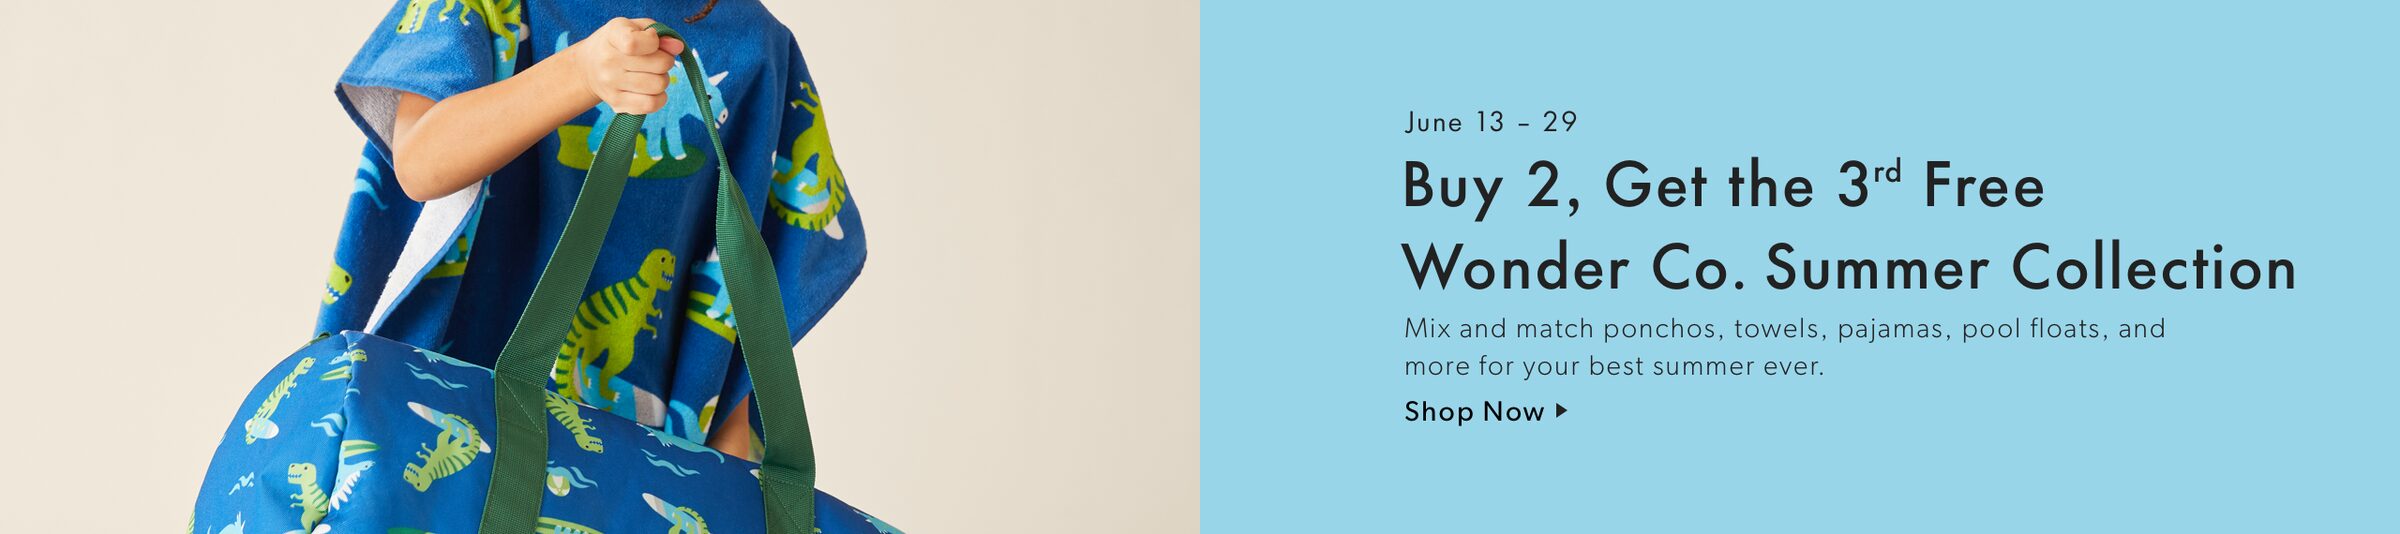 June 13 - 29 Buy 2, Get the 3rd Free on The Wonder Co. Summer Collection